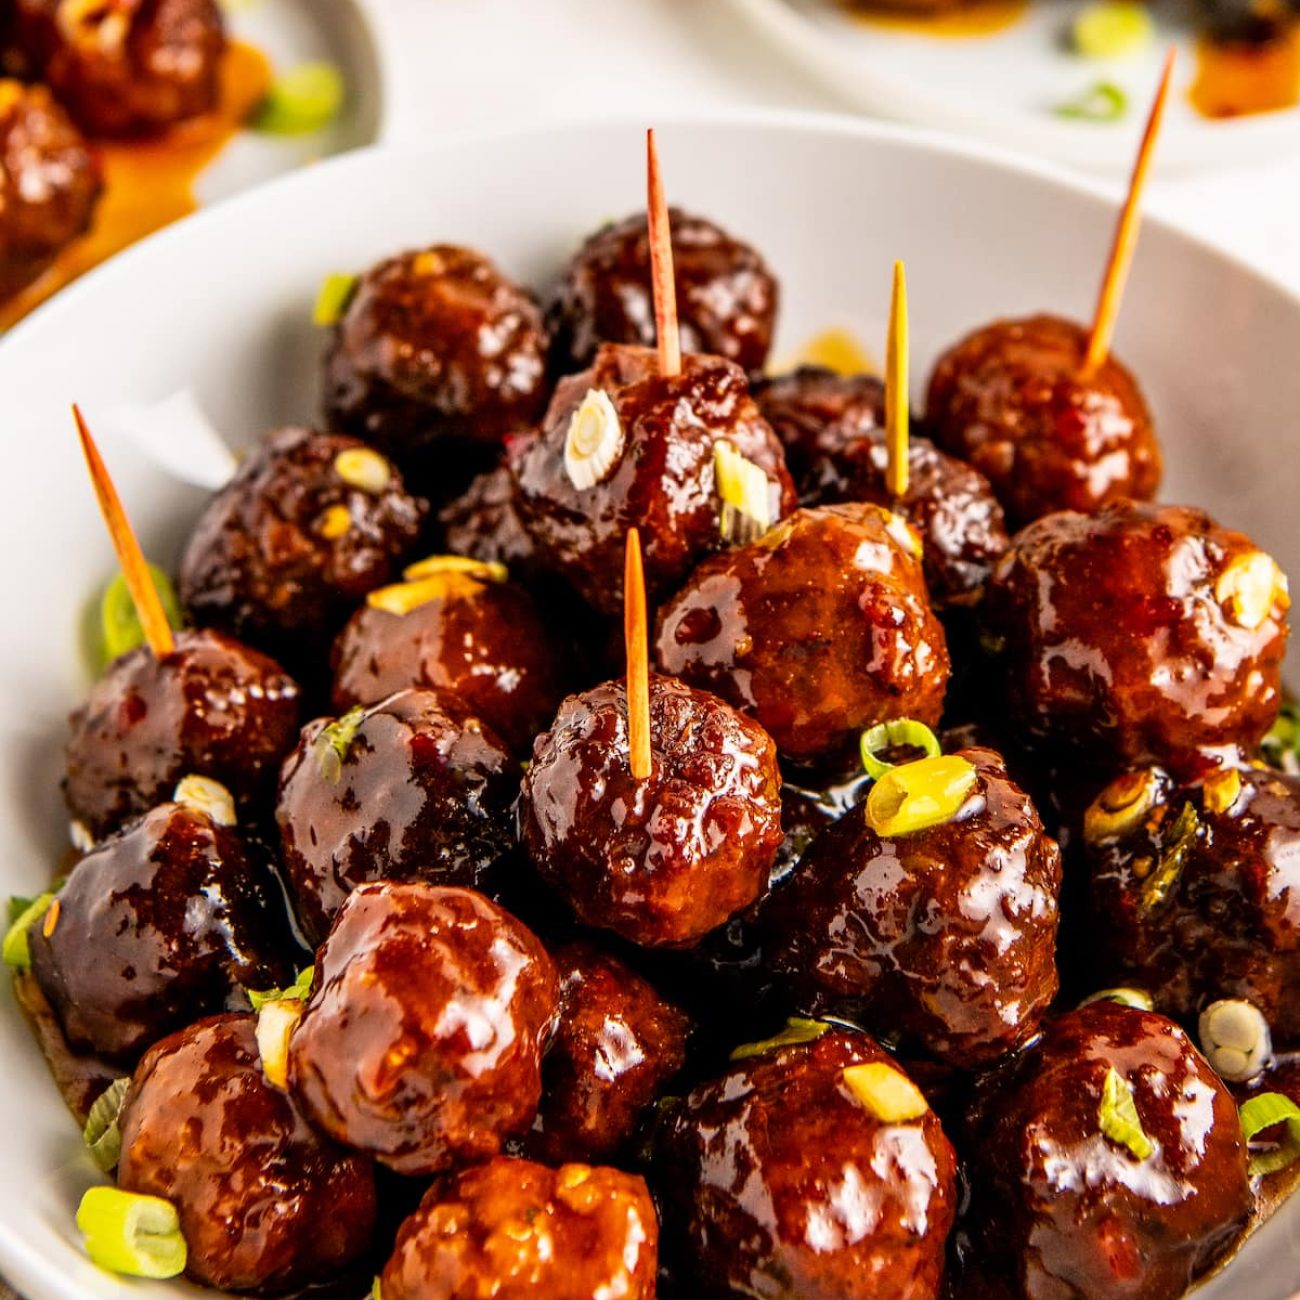 Tangy Sweet and Sour Meatball Glaze Recipe